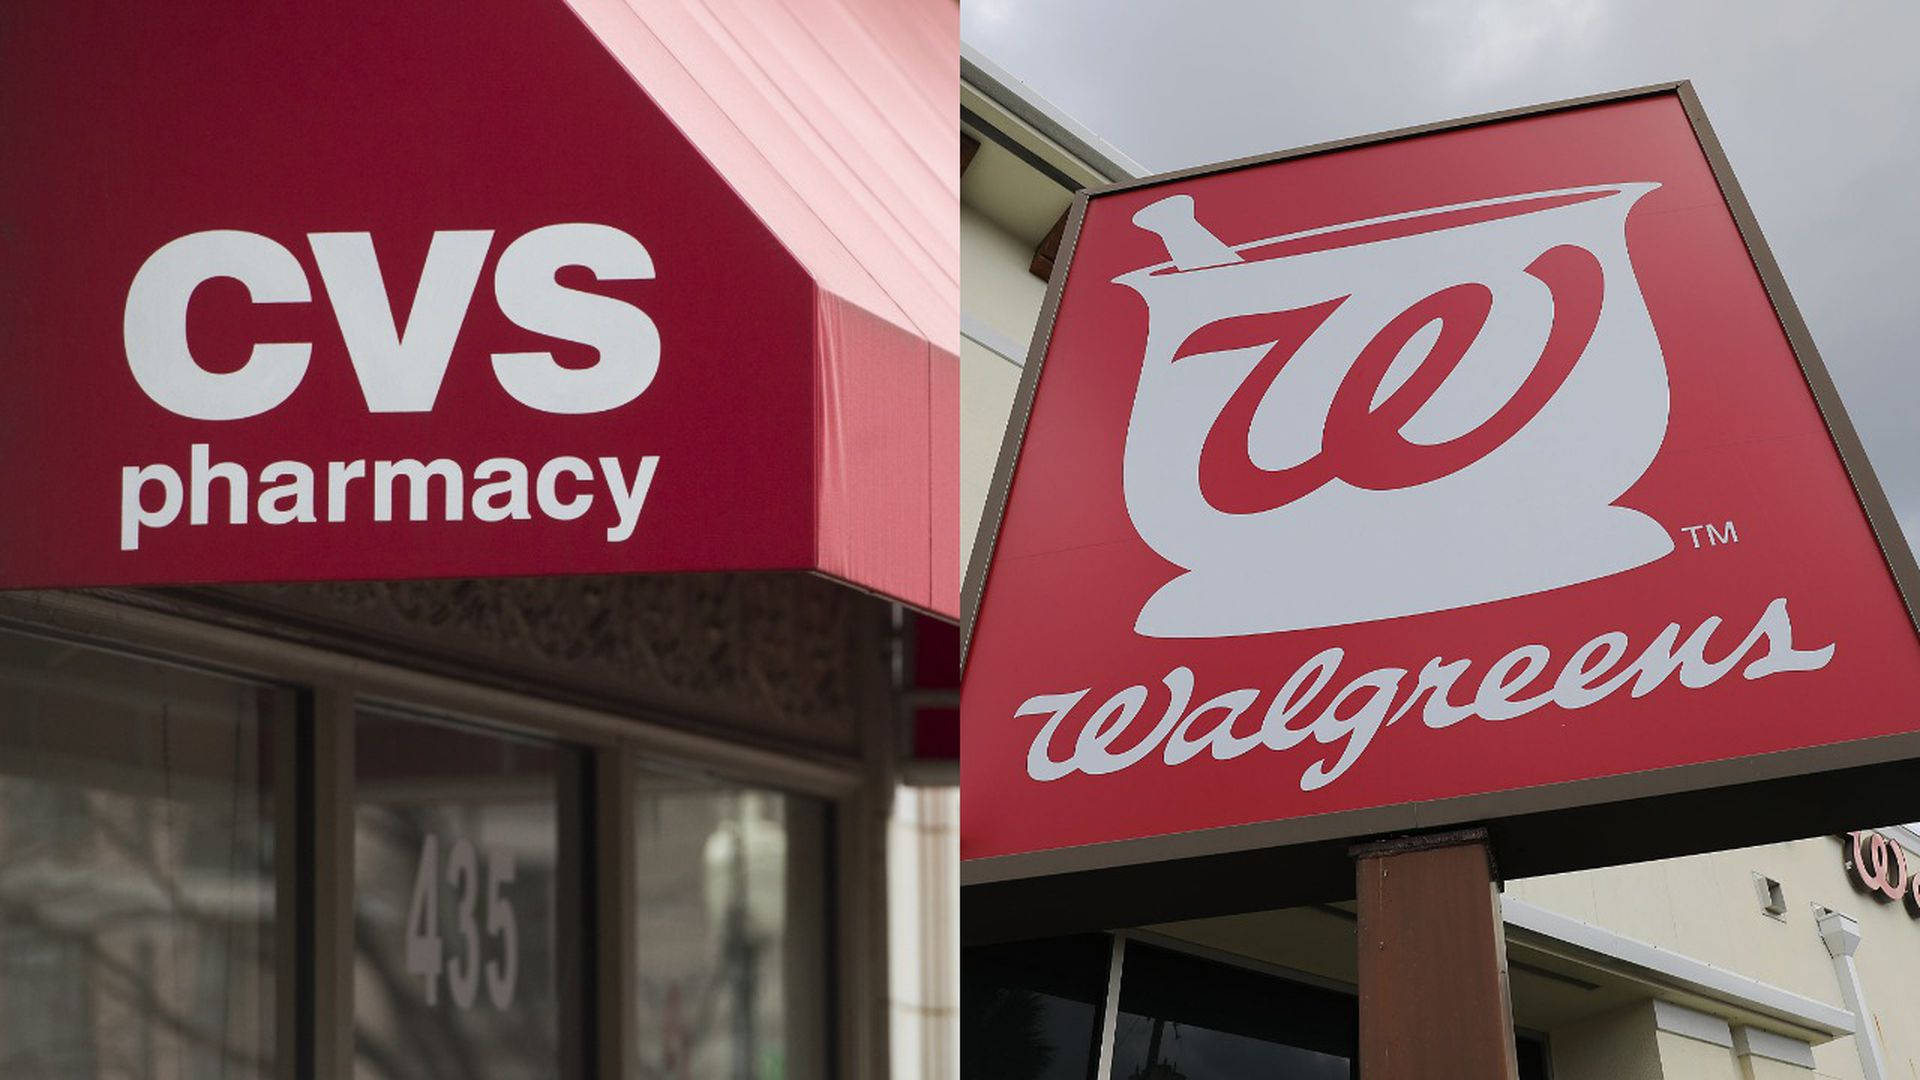 Cvs Walgreens Pharmacy Signage Picture